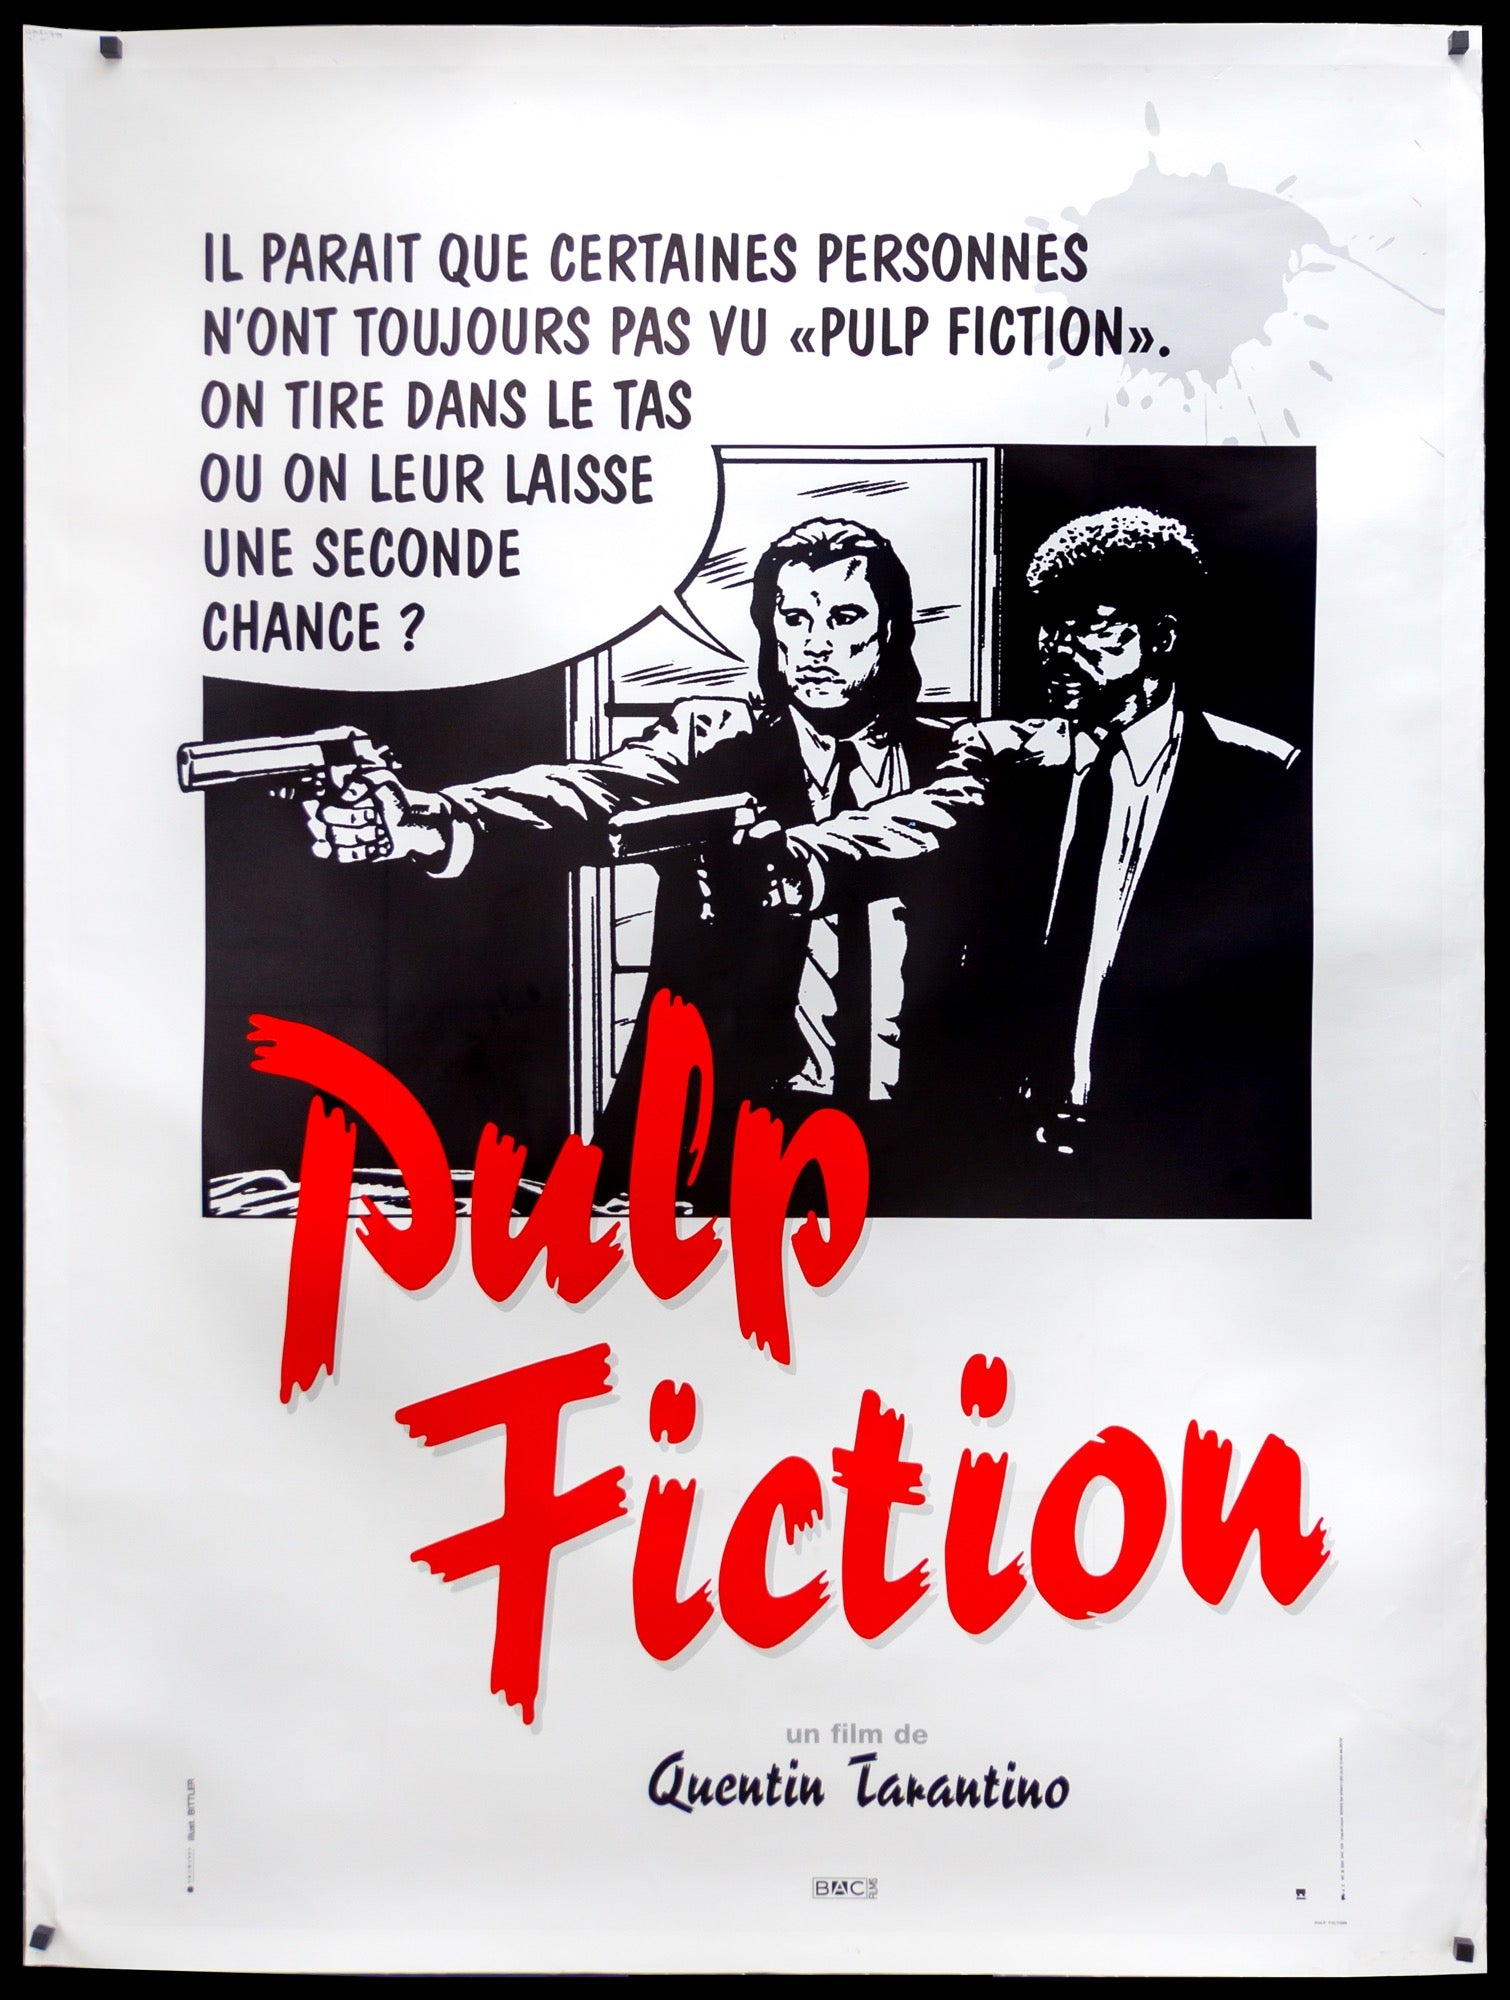 Pulp Fiction (1994) directed by Quentin Tarantino • Reviews, film